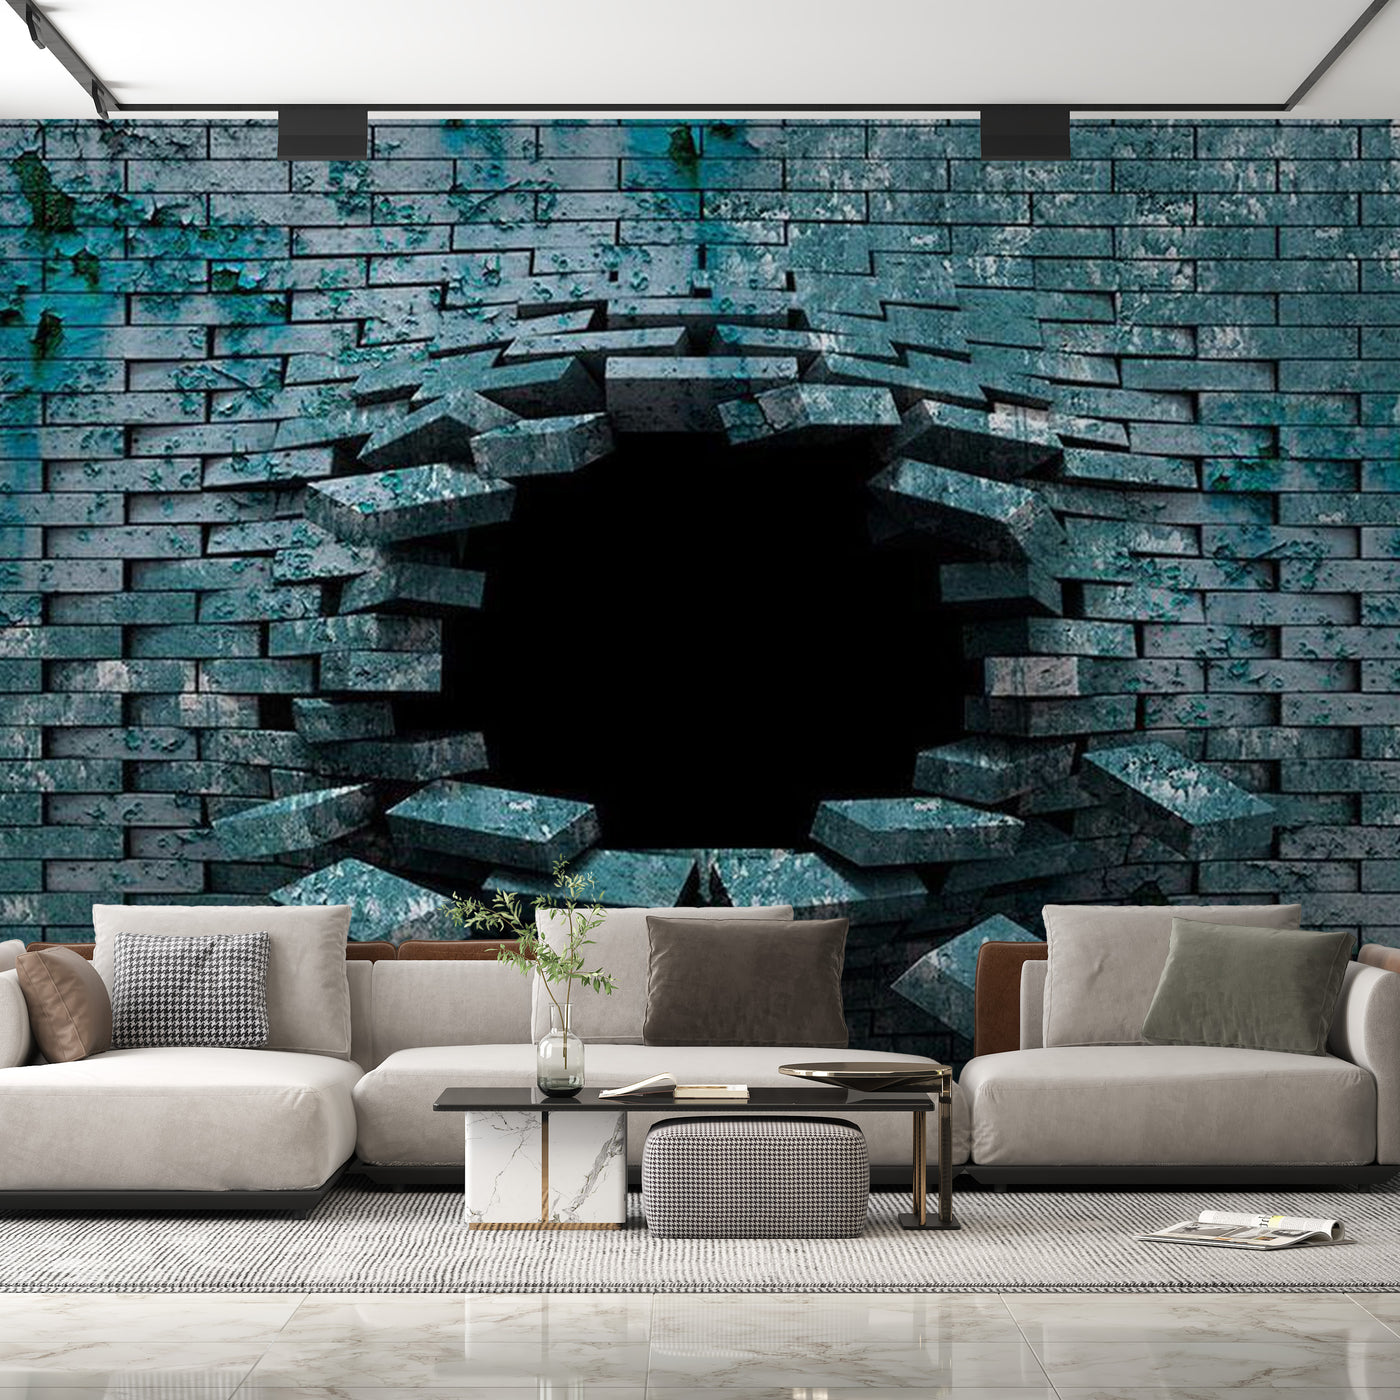 Peel & Stick 3D Illusion Wall Mural -Blue Bricks - Removable Wall Decals